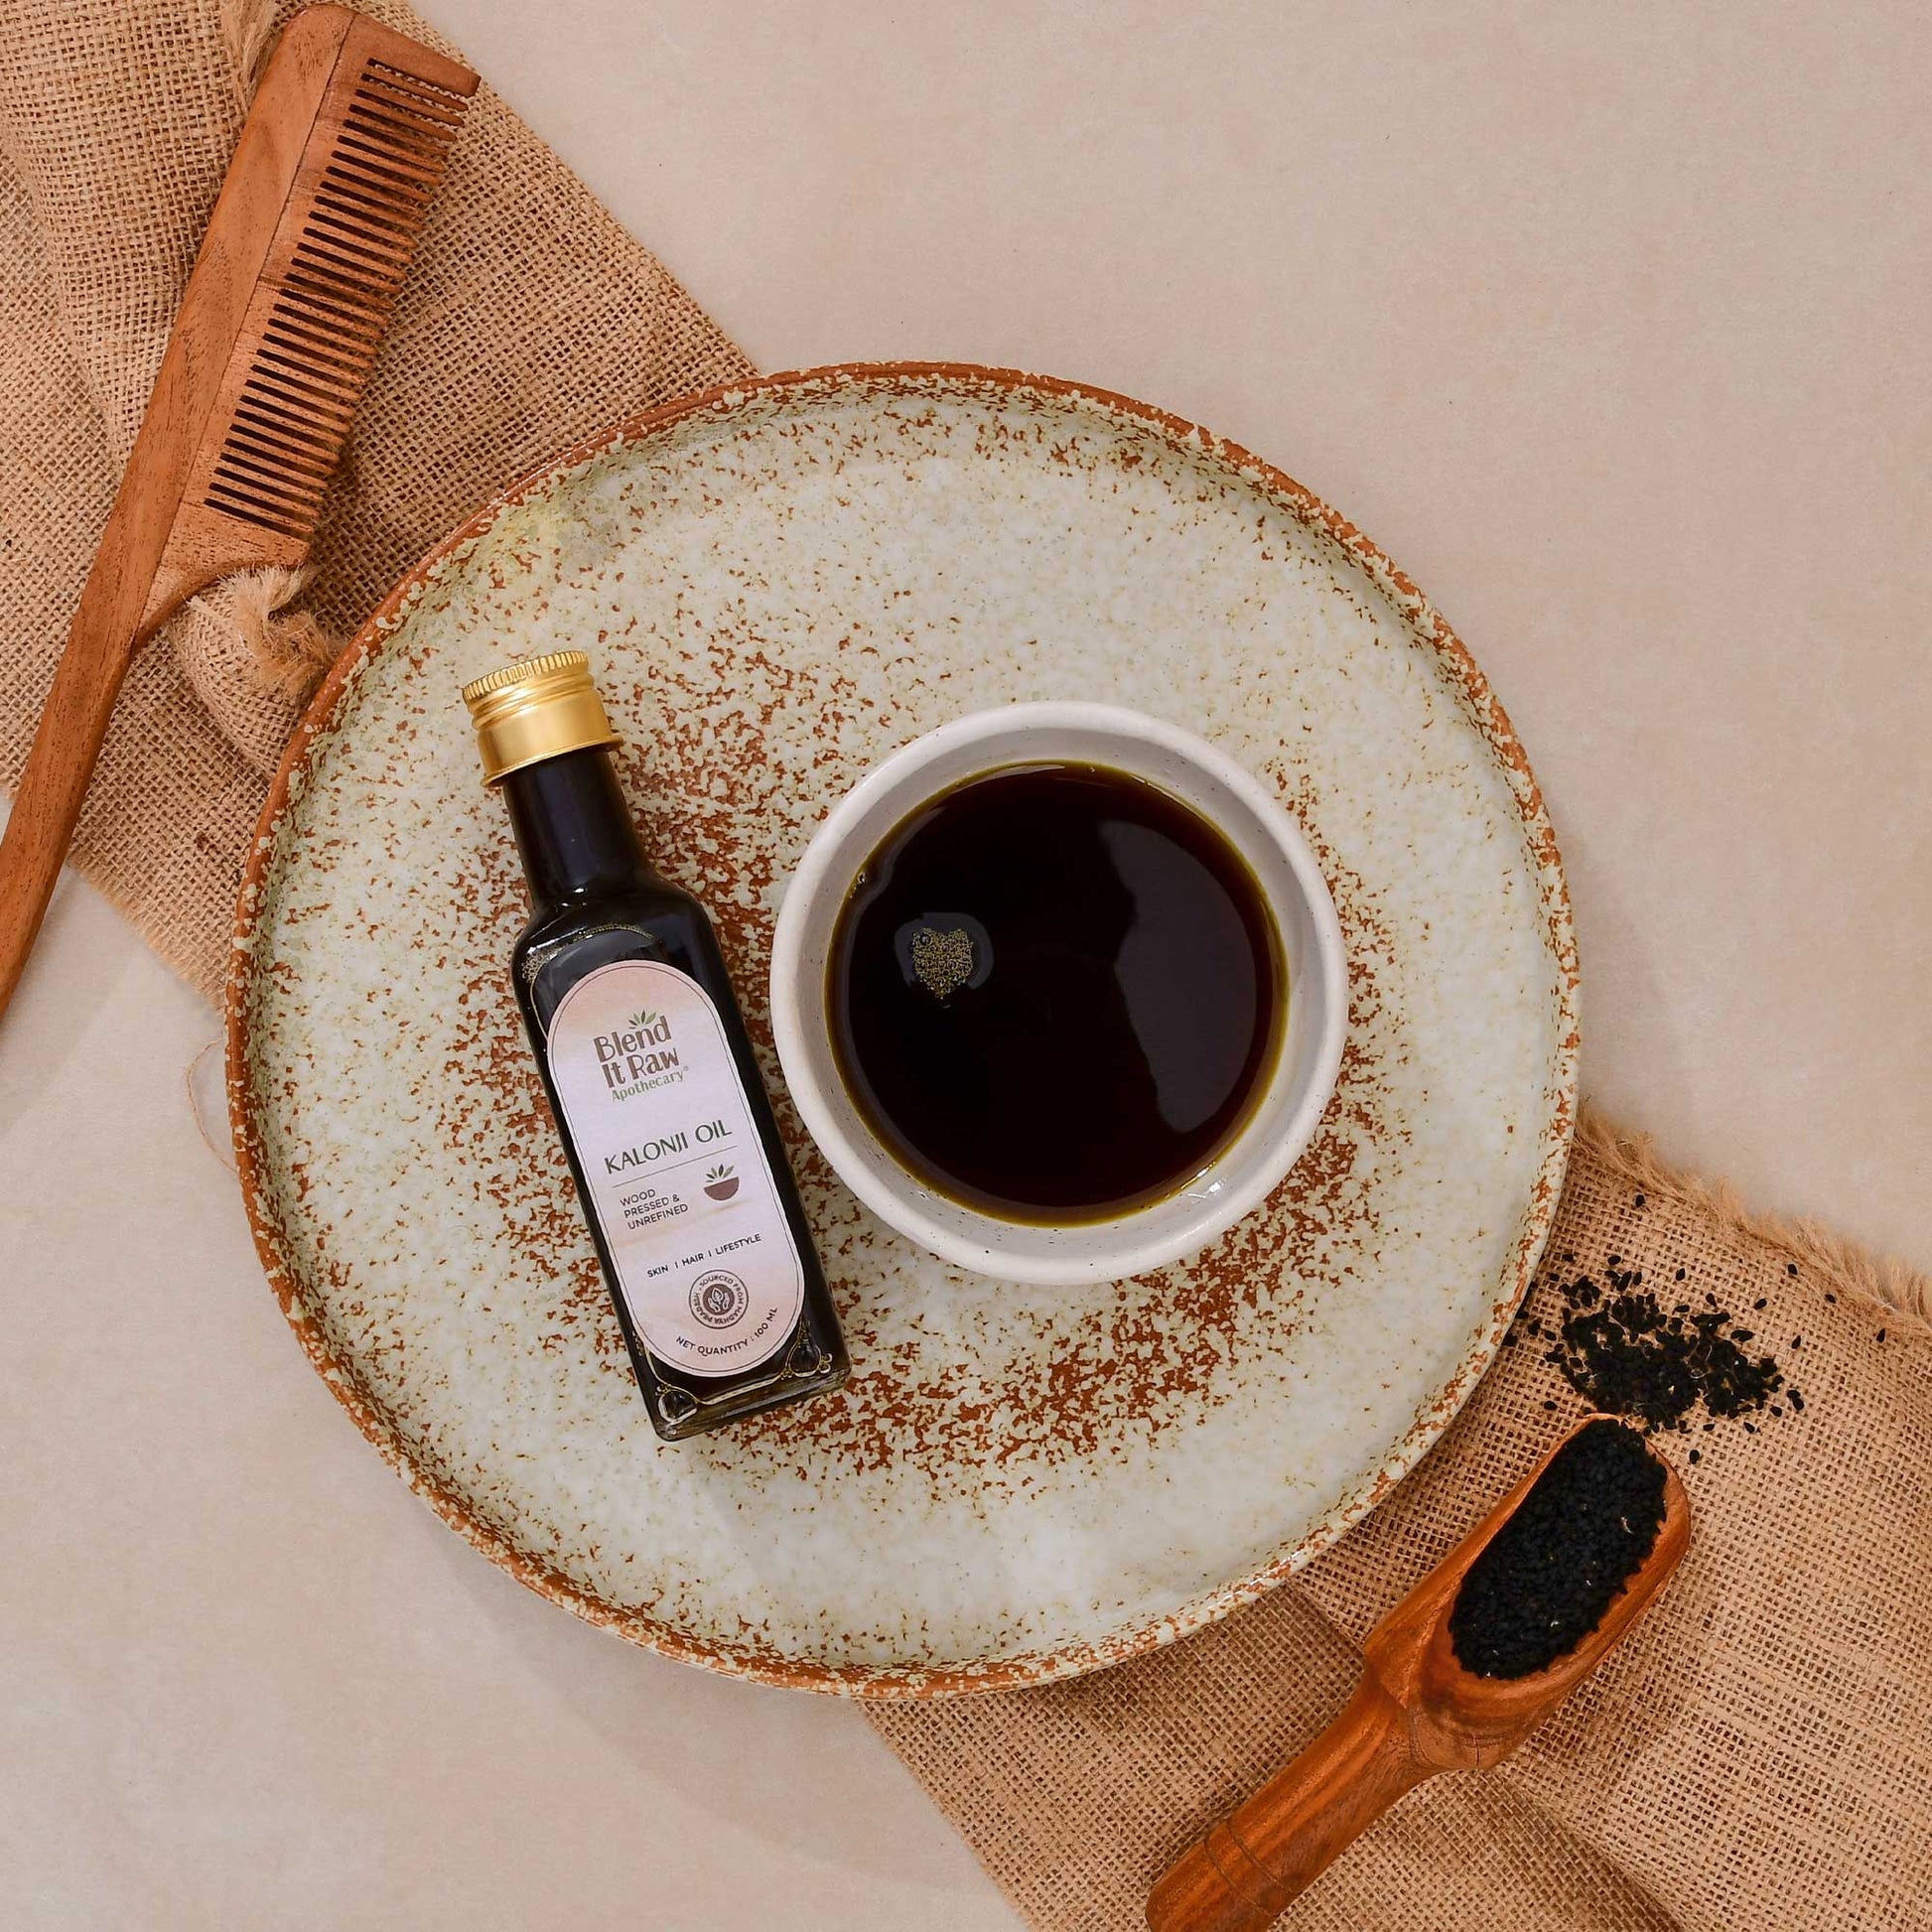 Kalonji Oil- Blend It Raw Apothecary [Cold pressed oil for hair growth]